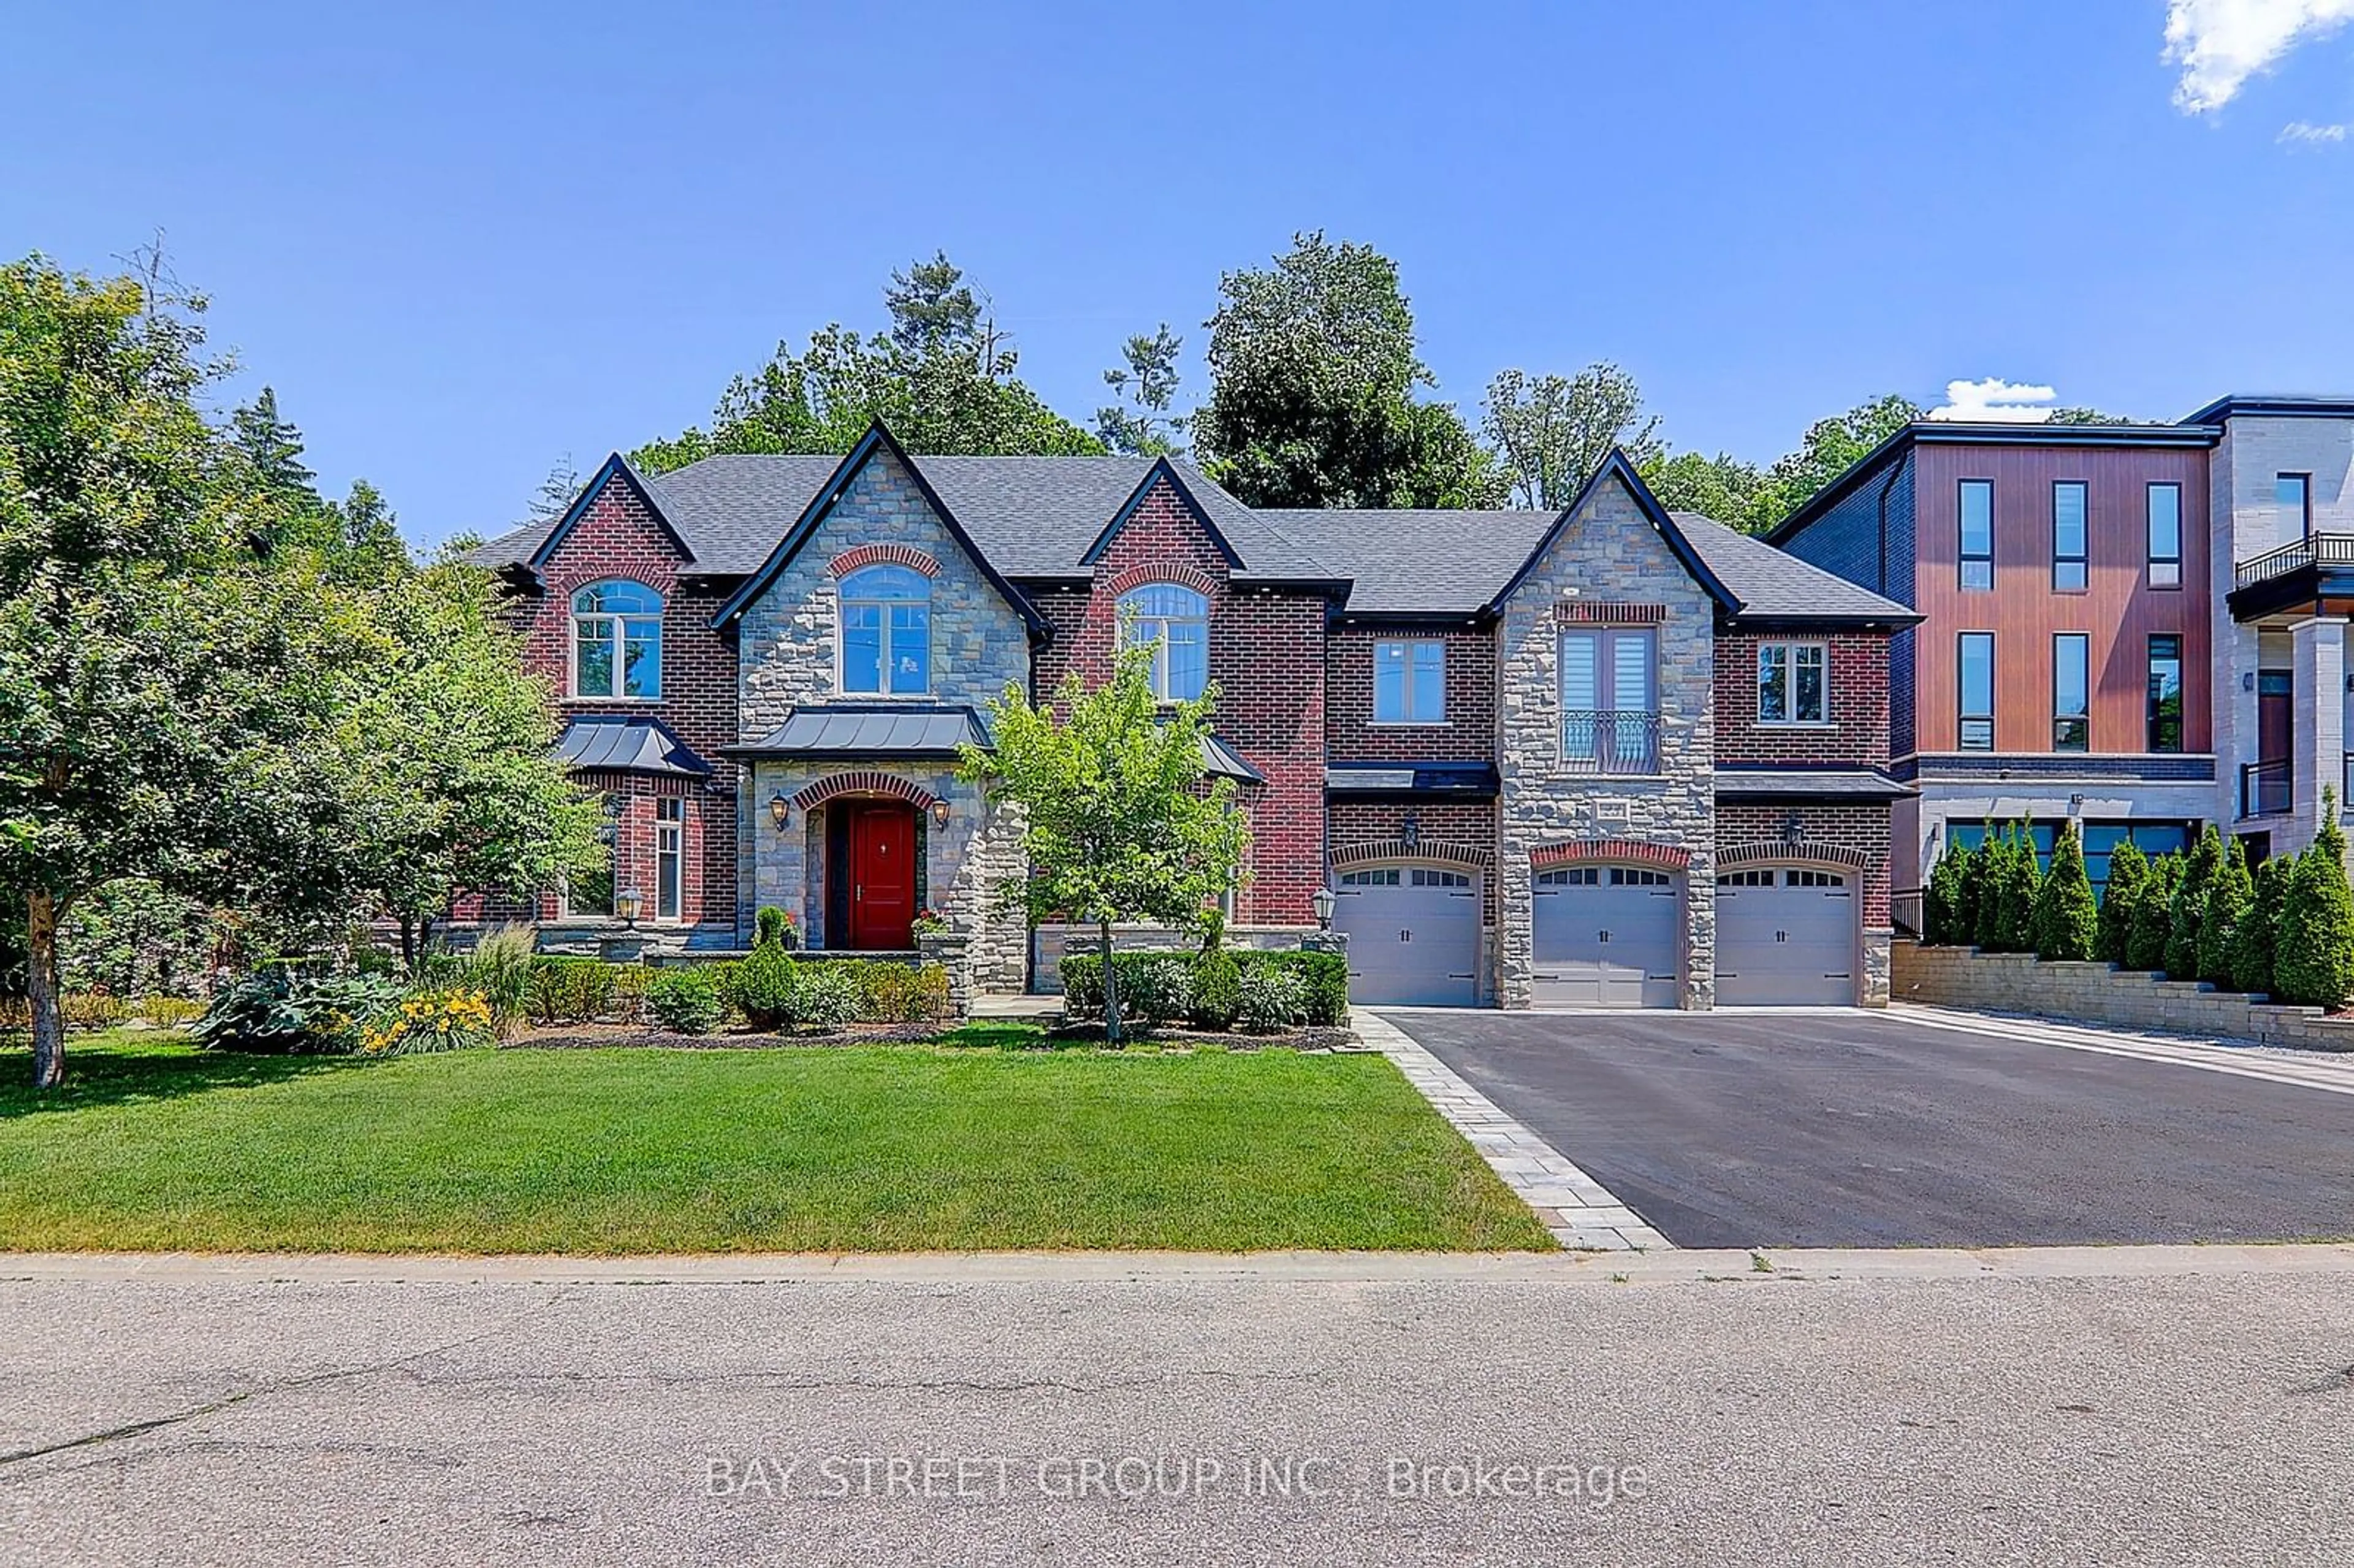 Home with brick exterior material for 23 Pine Ridge Ave, Vaughan Ontario L4L 2H8